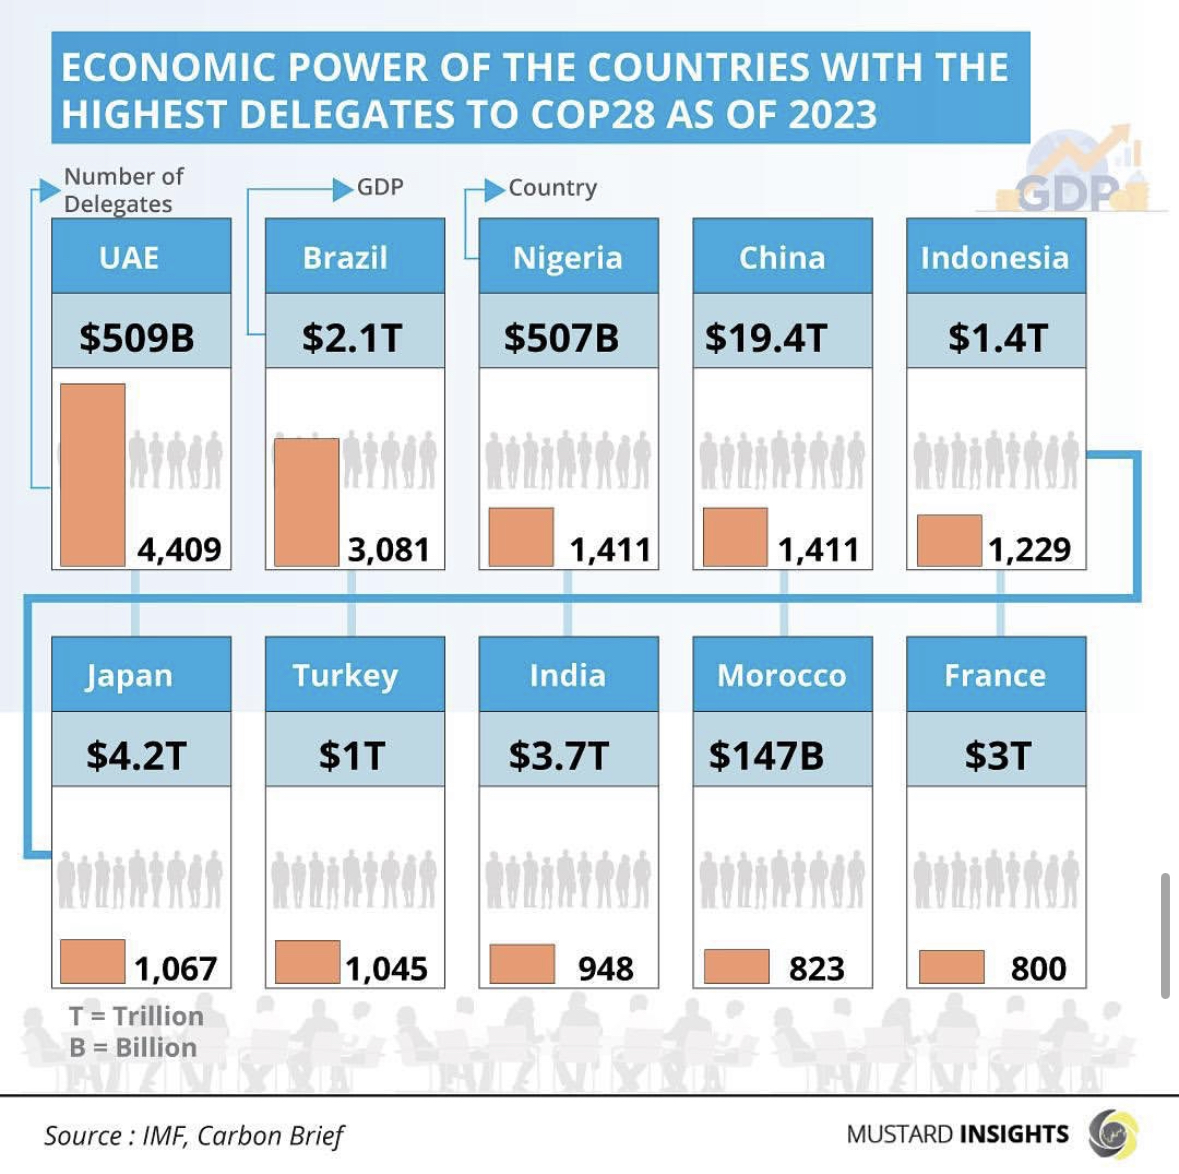 Economic Power Of The Countries With The Highest Delegates To COP28 As Of 2023